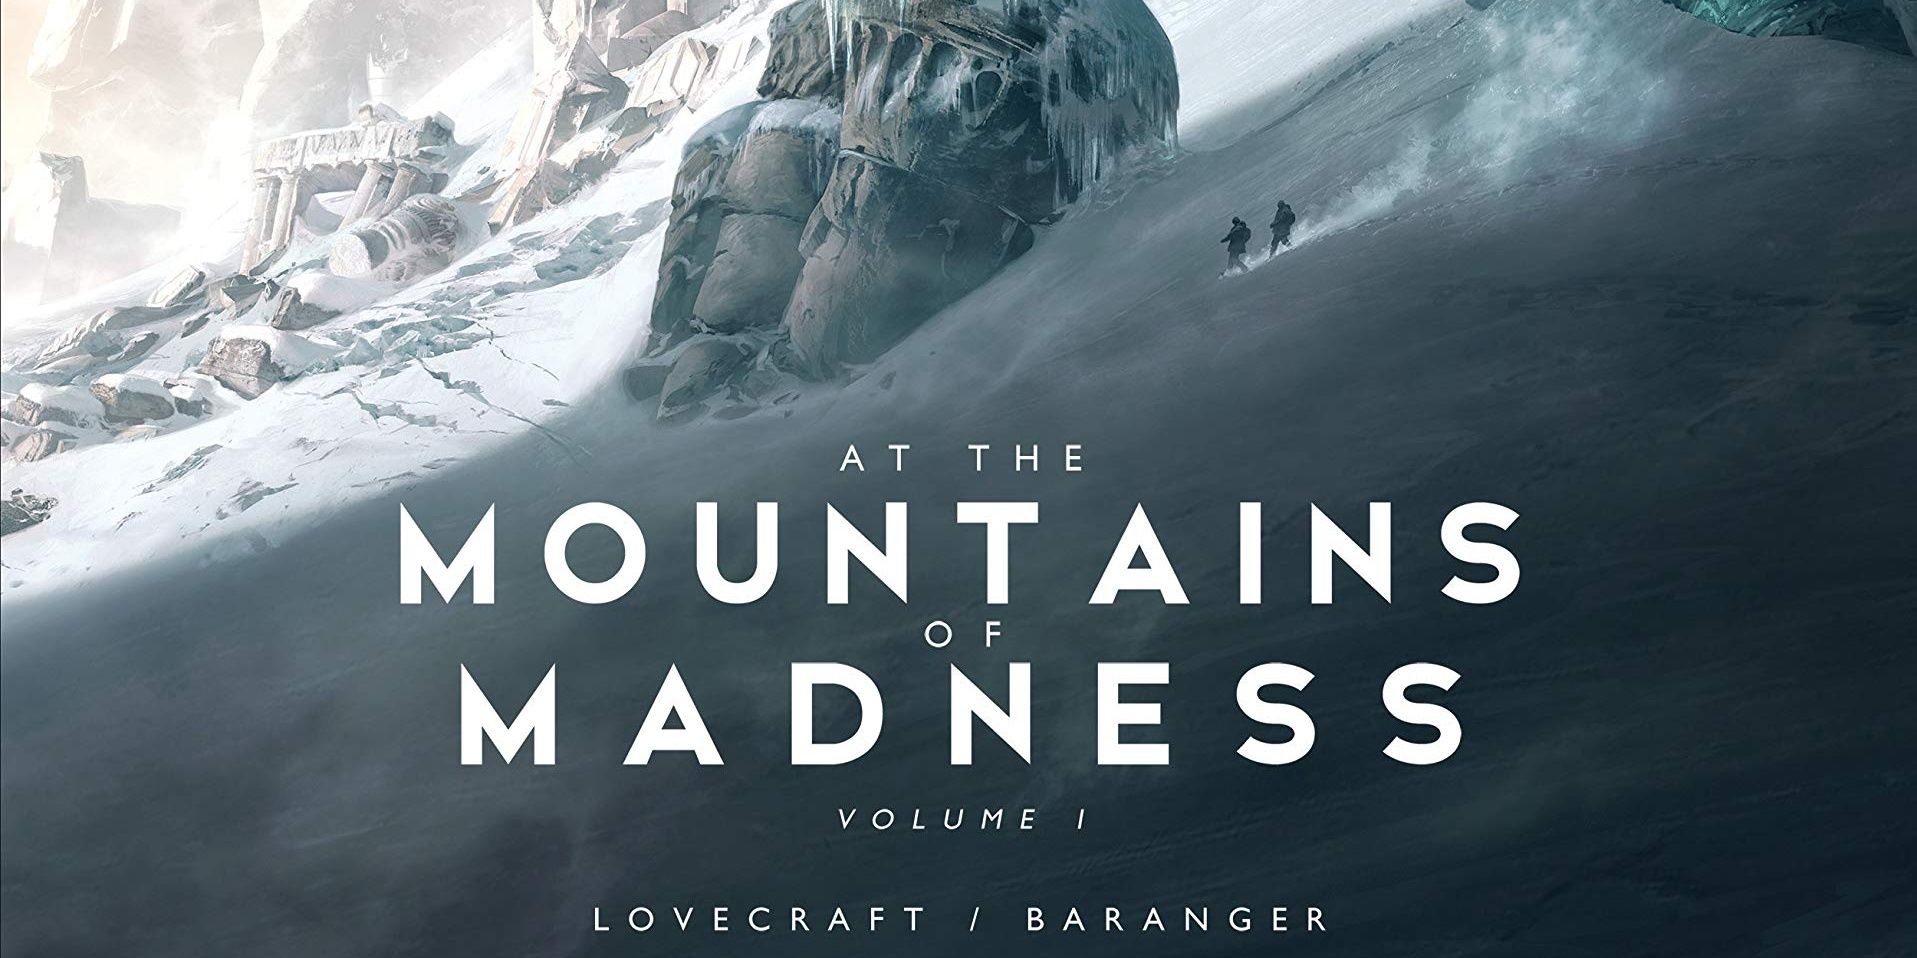 At The Mountains of Madness book cover.